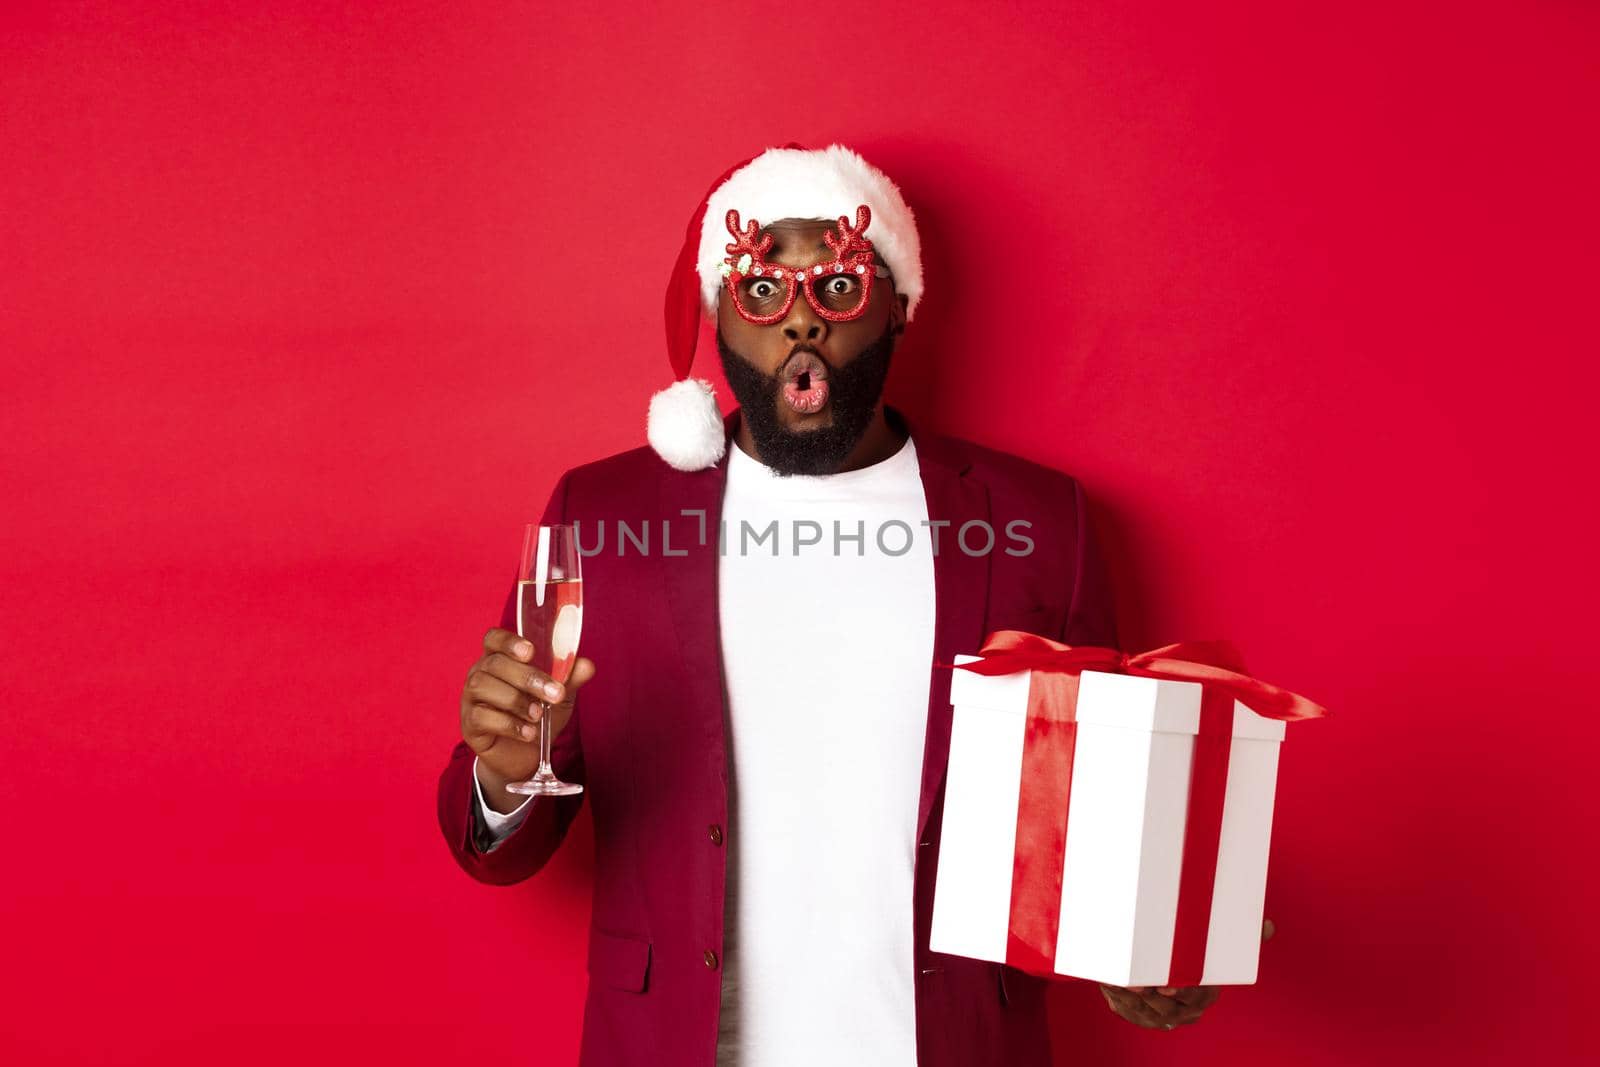 Christmas. Handsome african american man in party glasses and santa hat, holding new year gift and glass of champagne, wishing happy holidays, red background.